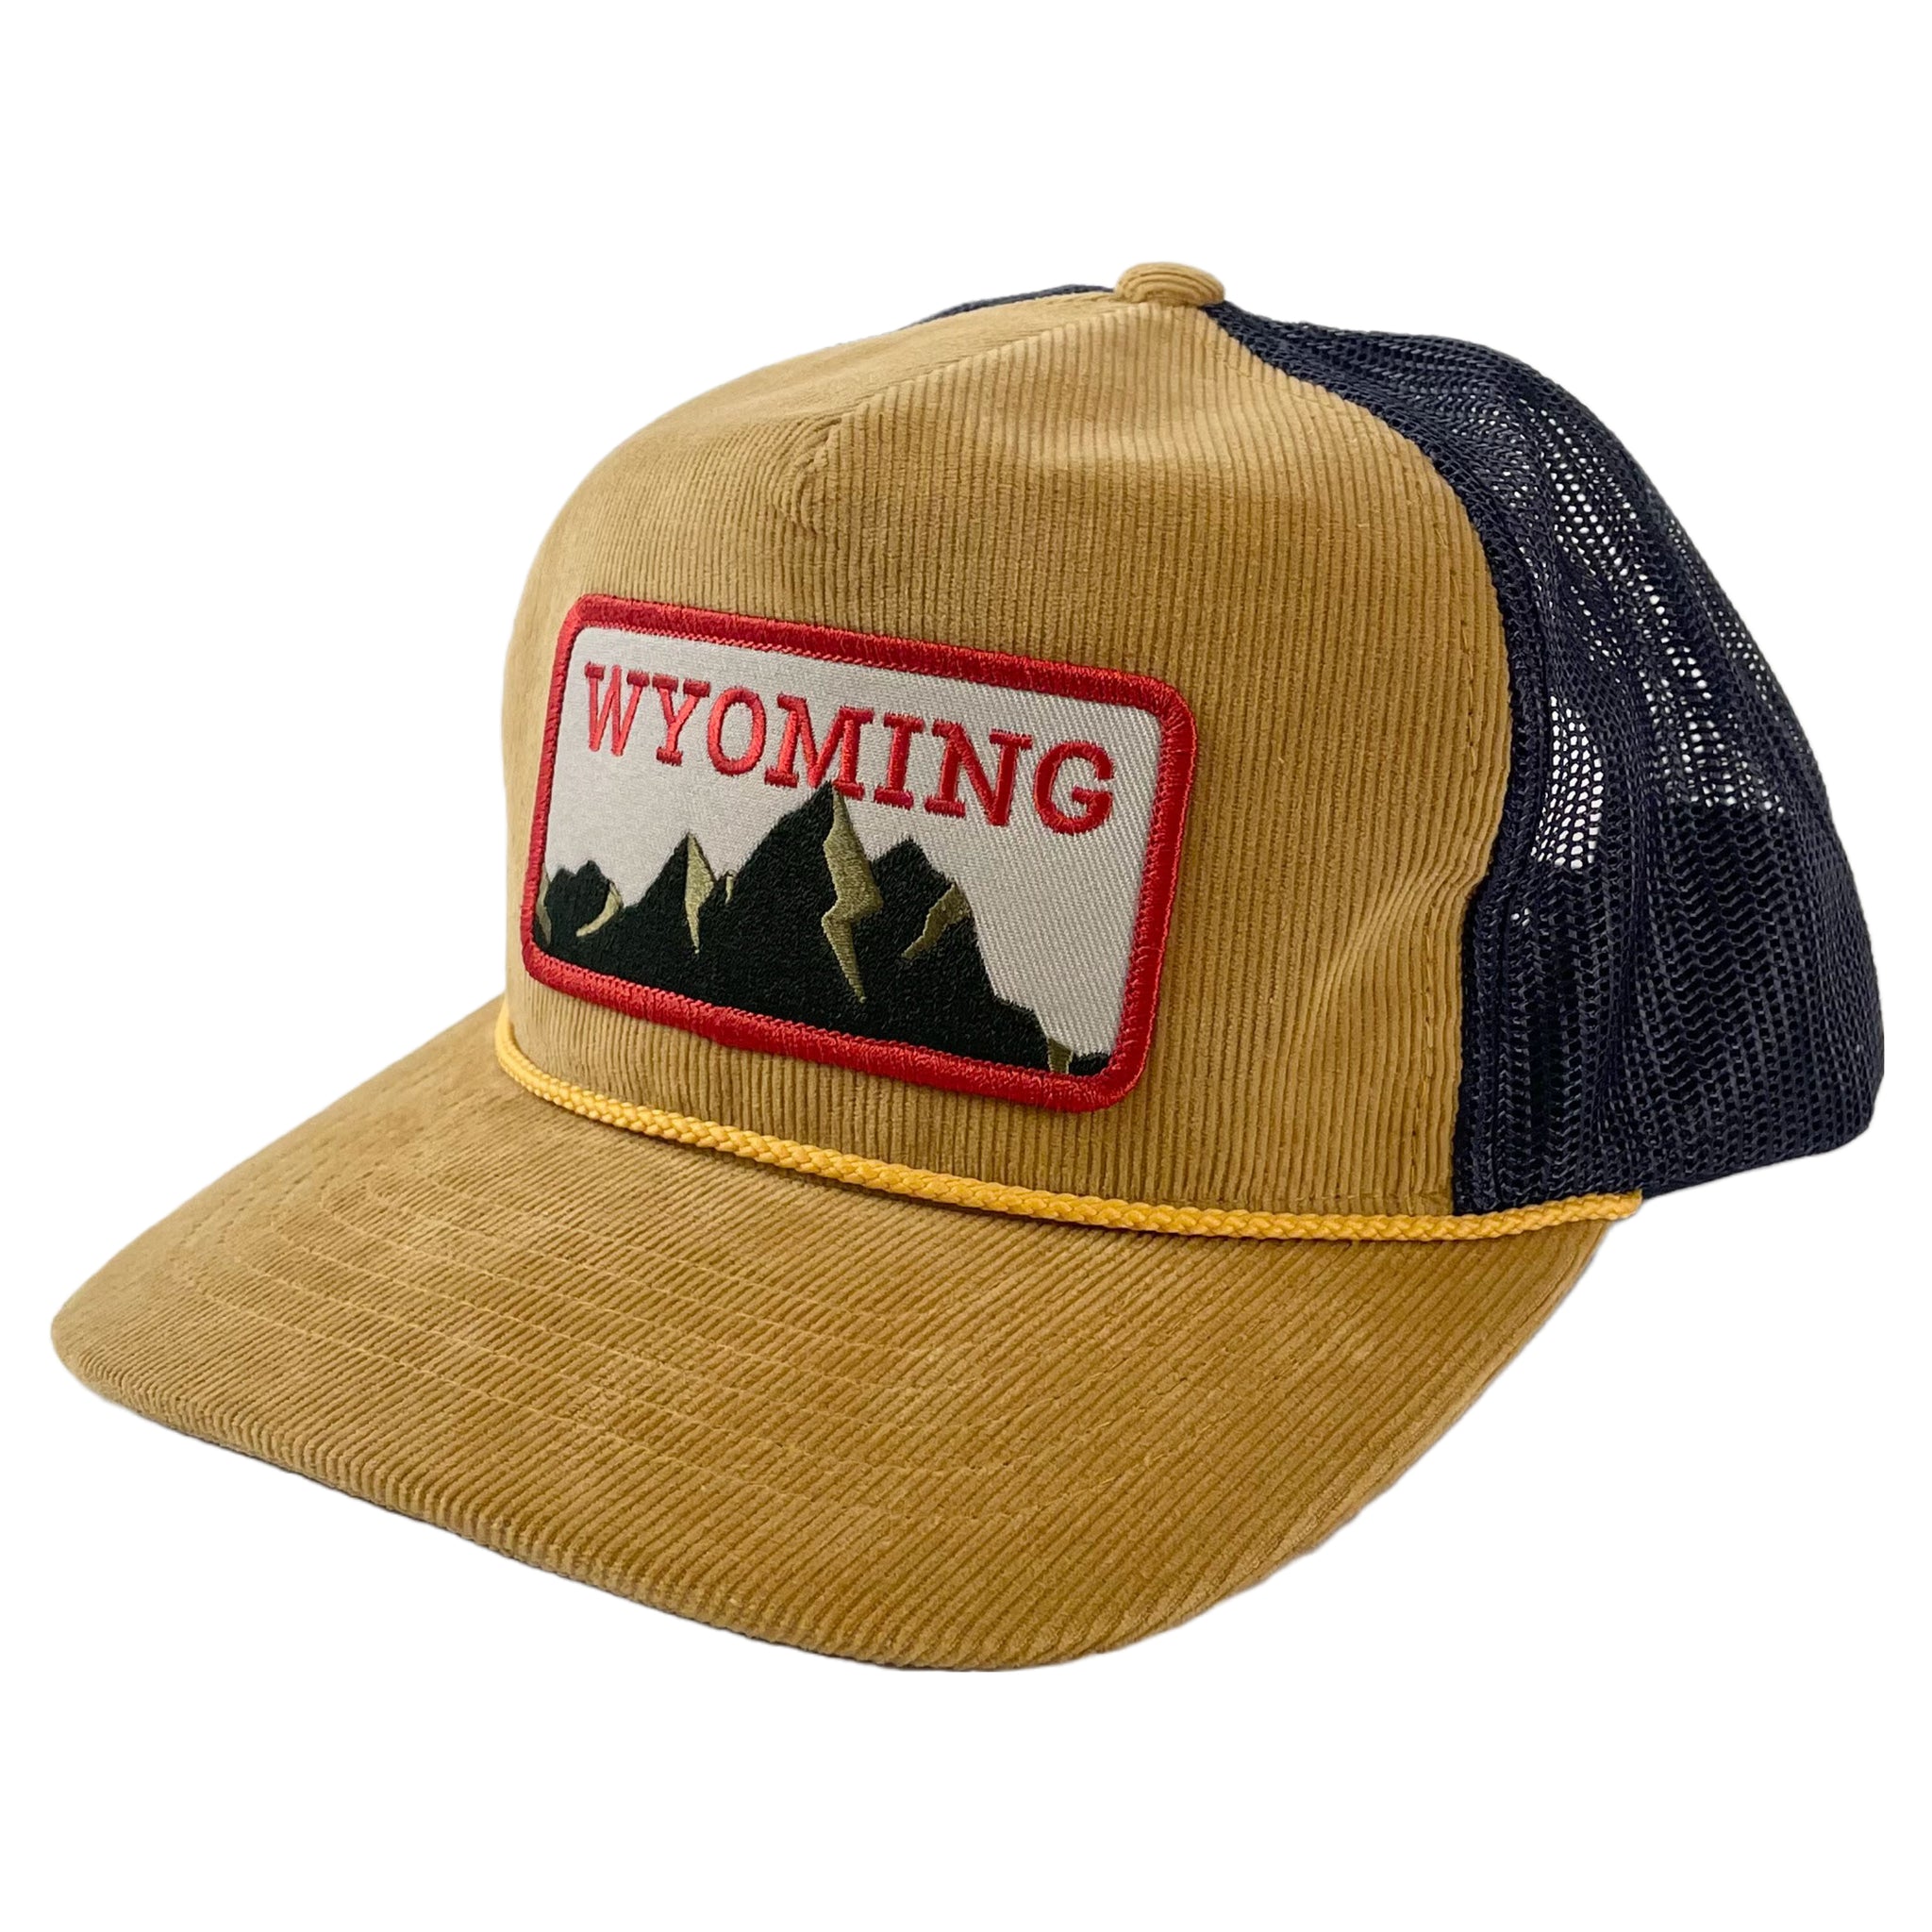 Wyoming Patch Hat- Grandpa Pinch - MADE